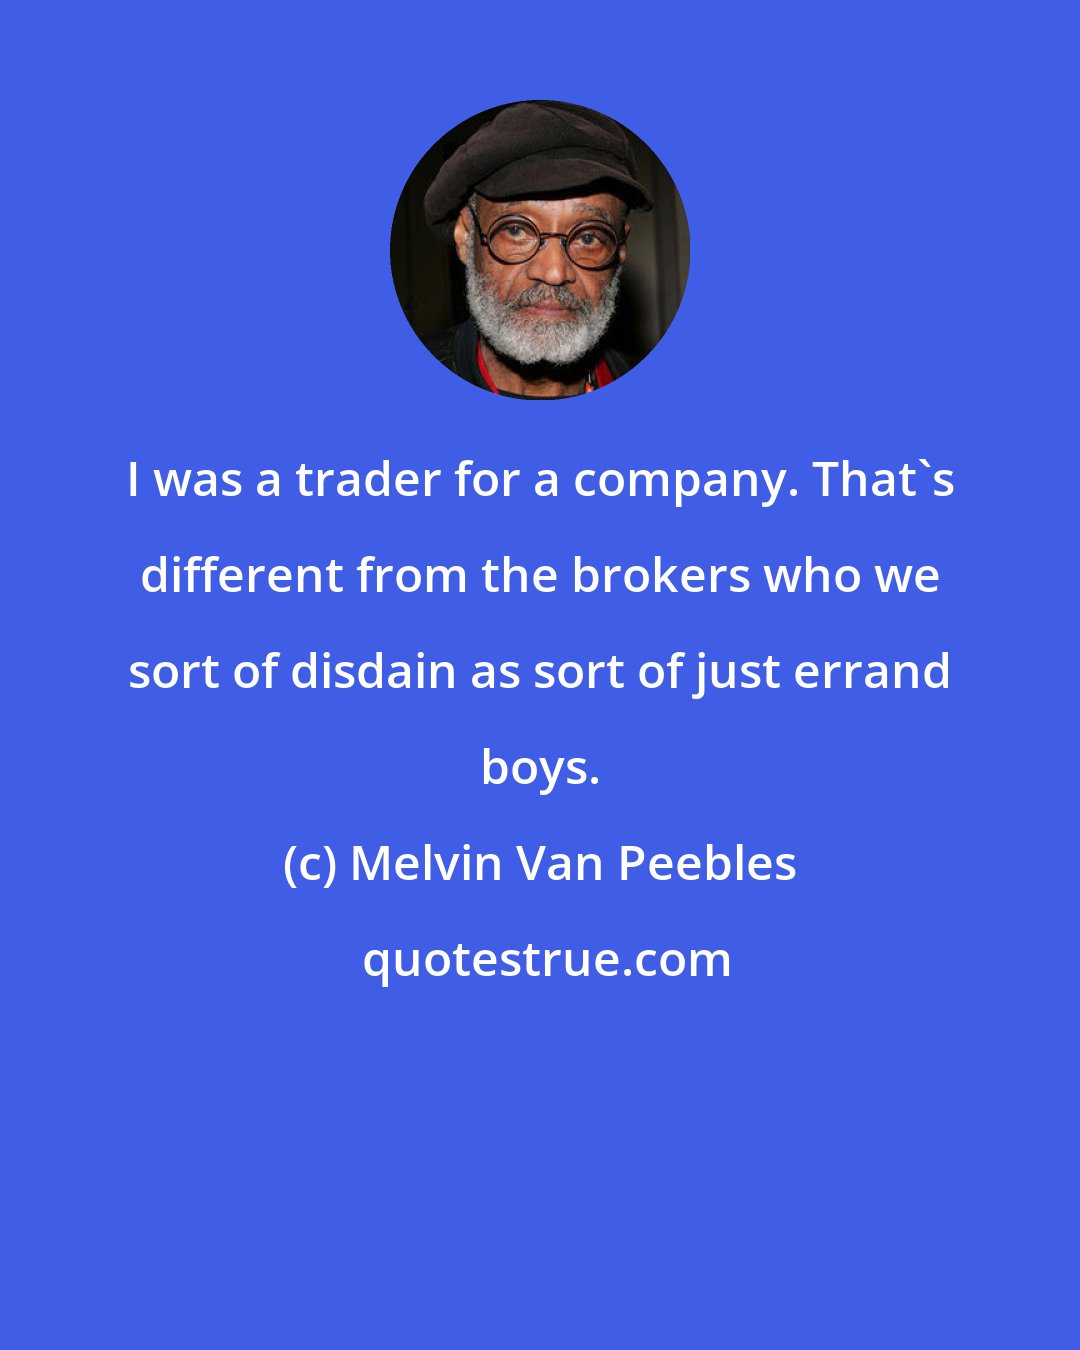 Melvin Van Peebles: I was a trader for a company. That's different from the brokers who we sort of disdain as sort of just errand boys.